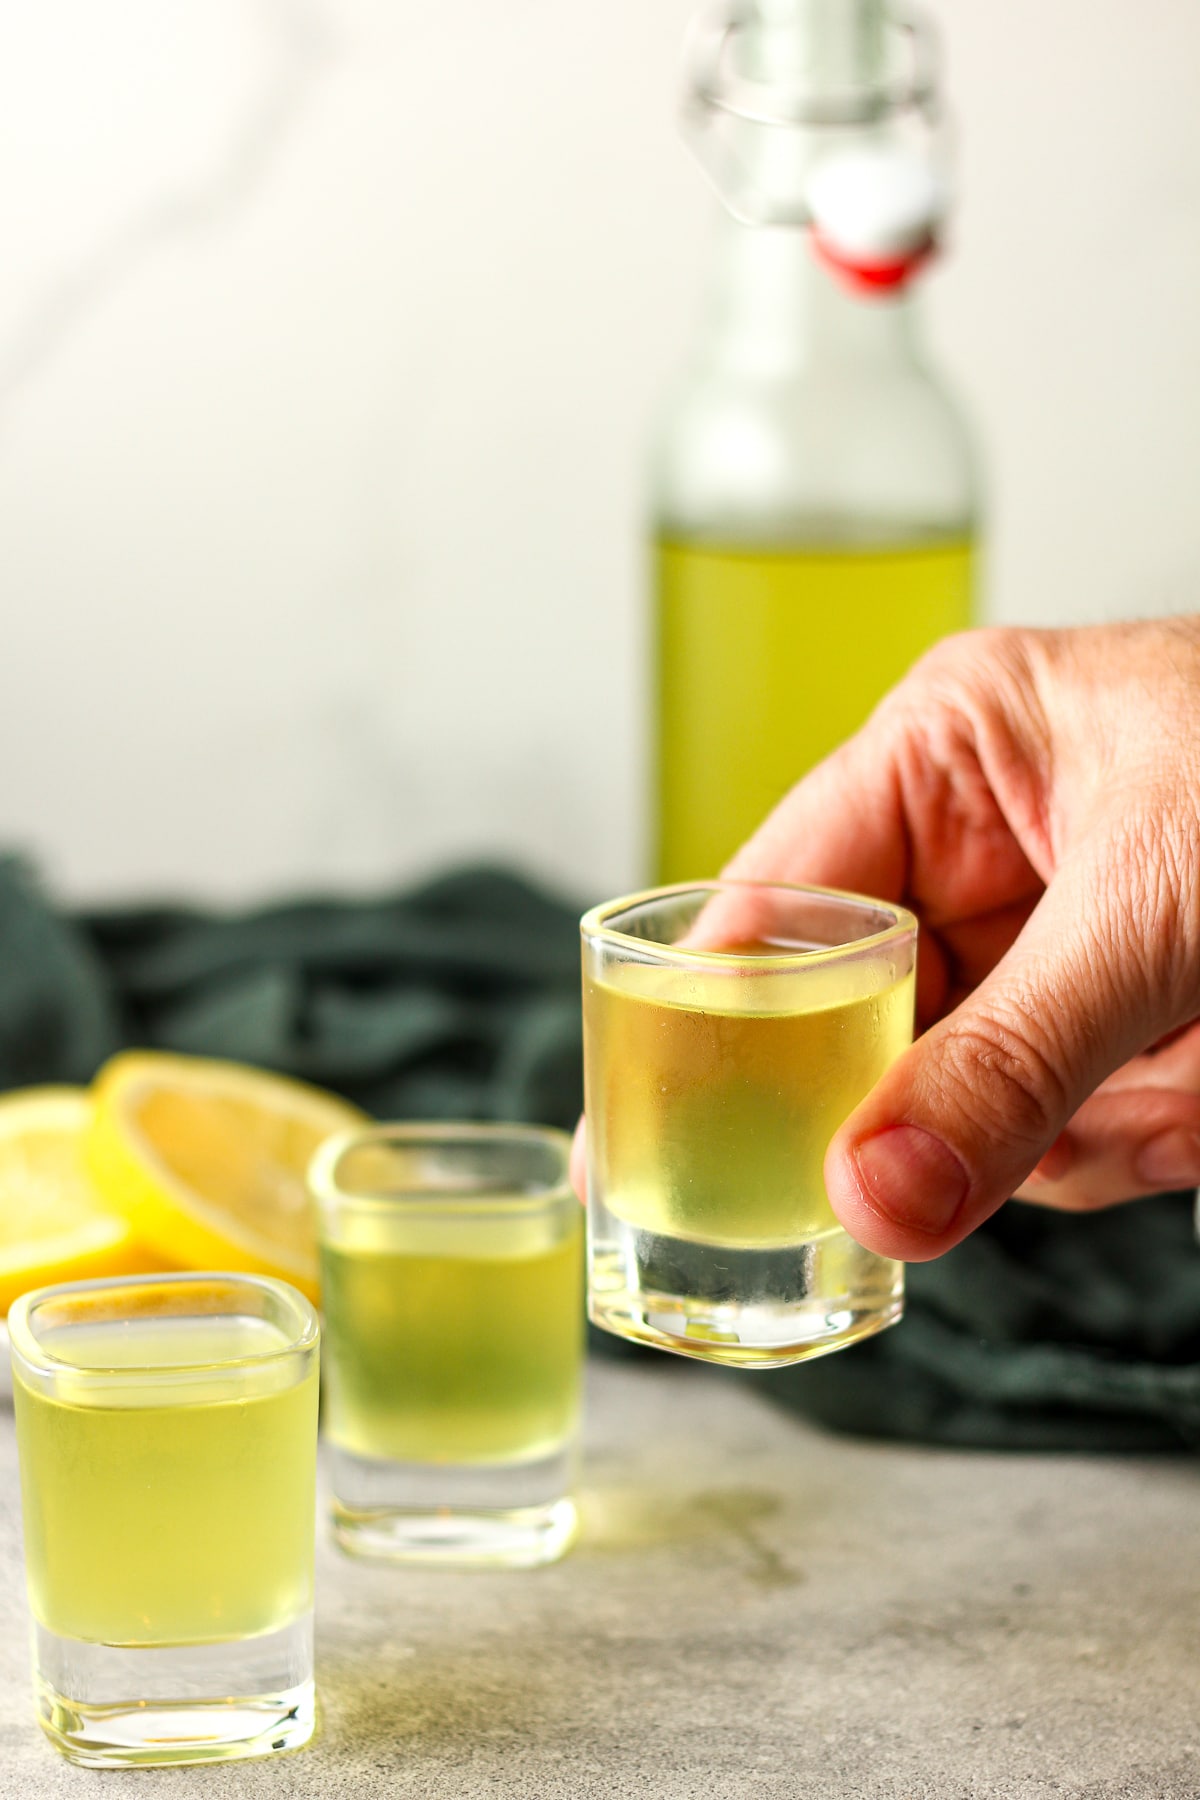 A hand holding up a shot of homemade limoncello.